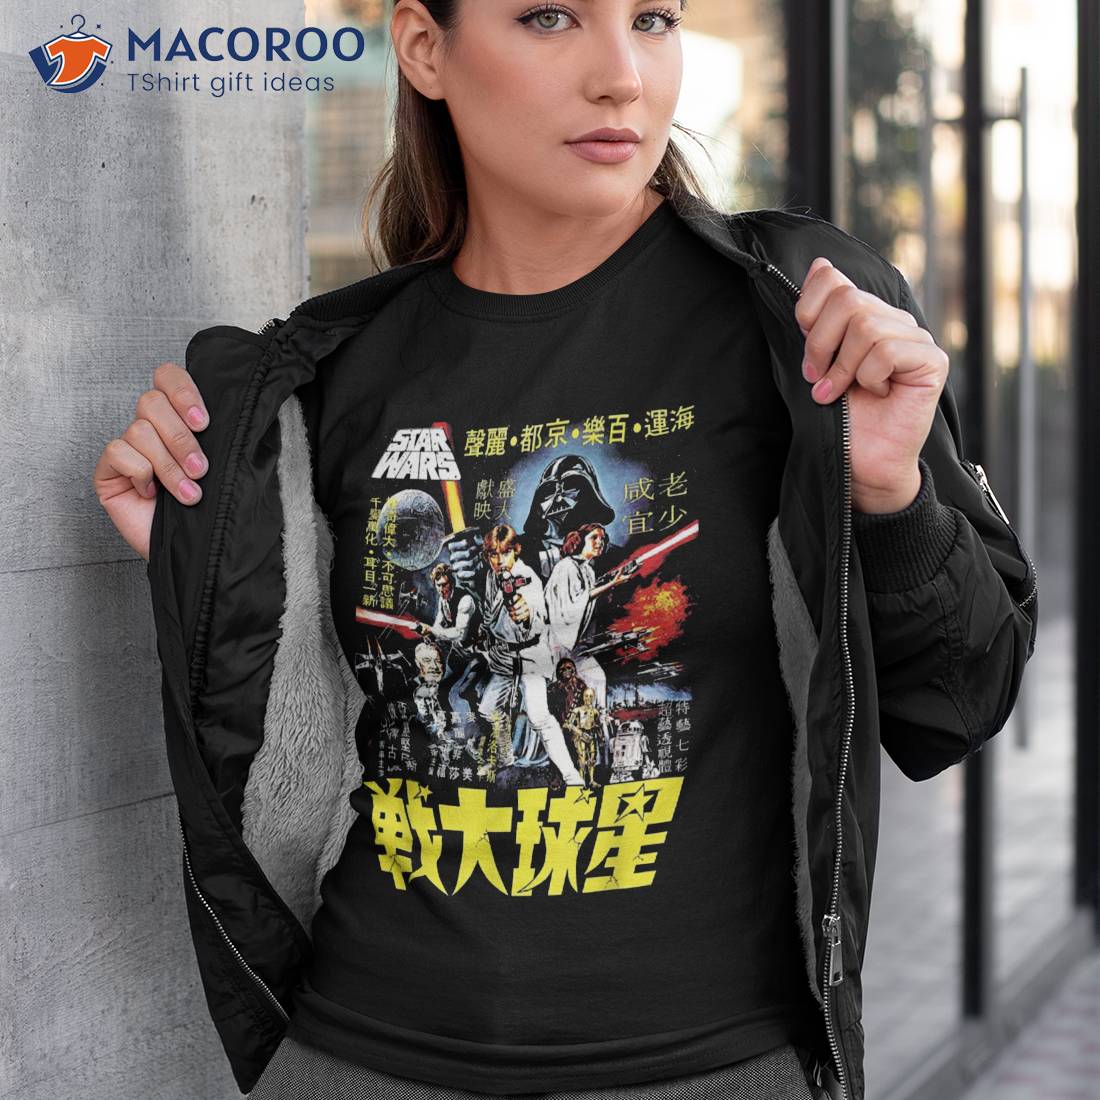 movie poster t shirts